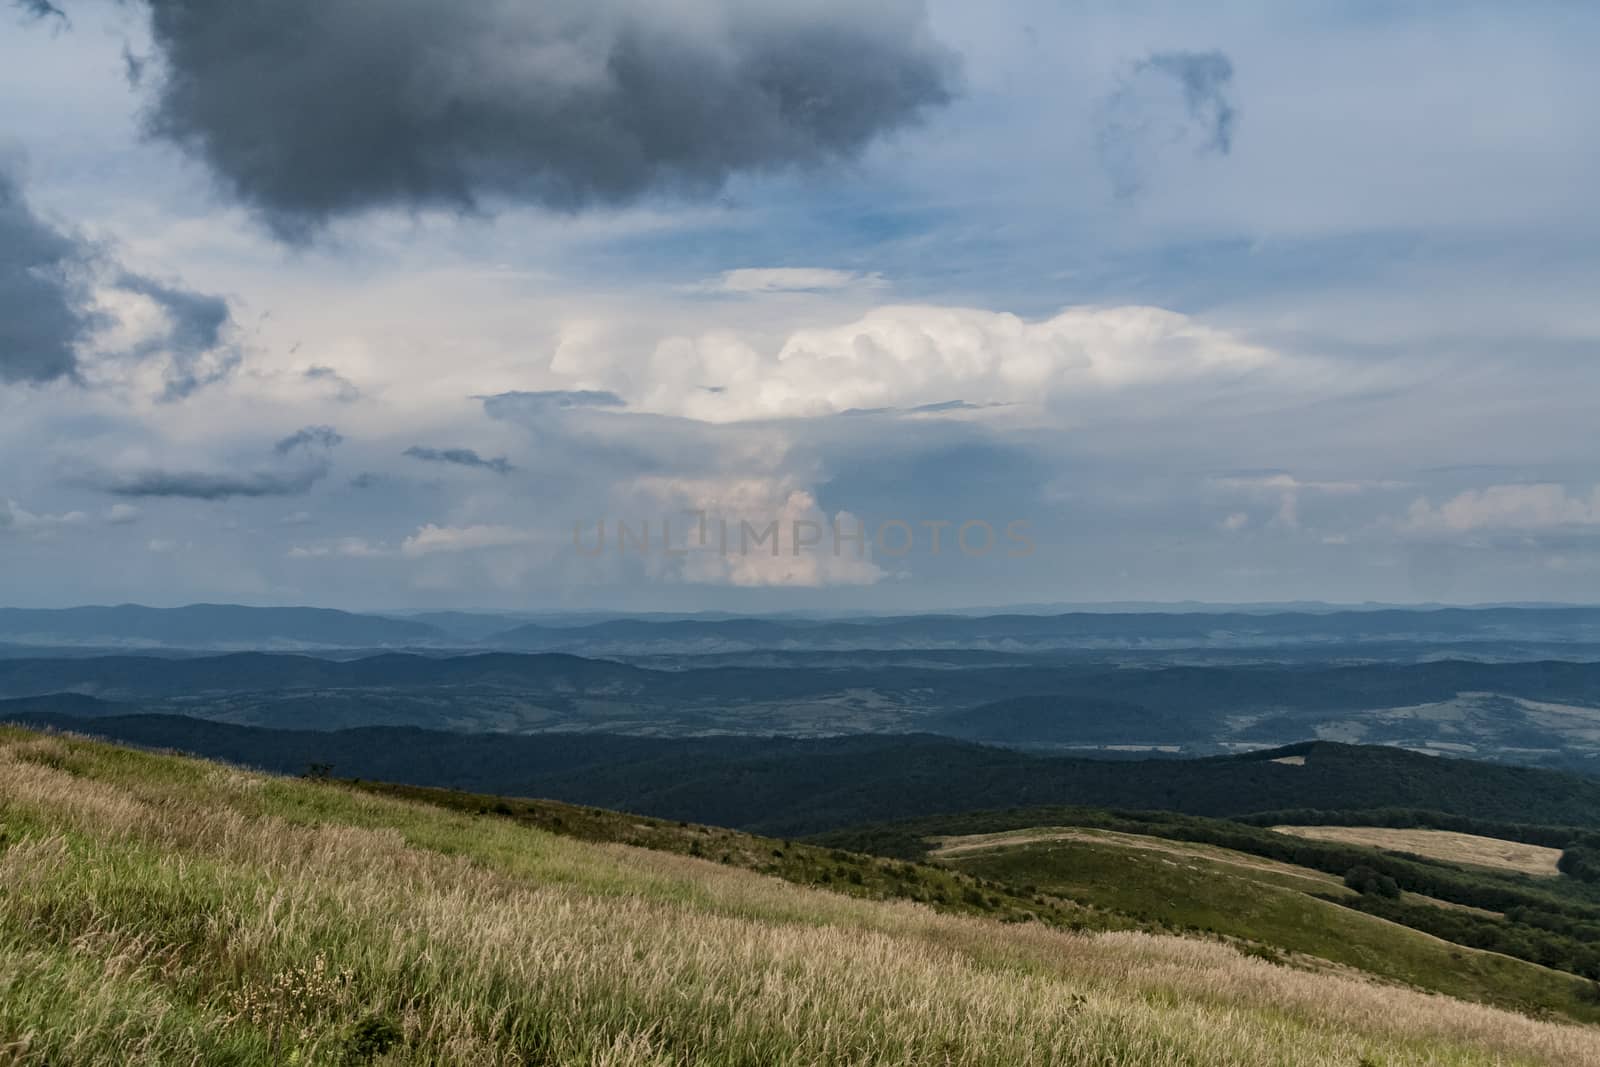 Road from Widelki to Tarnica through Bukowe Berdo in the Bieszczady Mountains in Poland